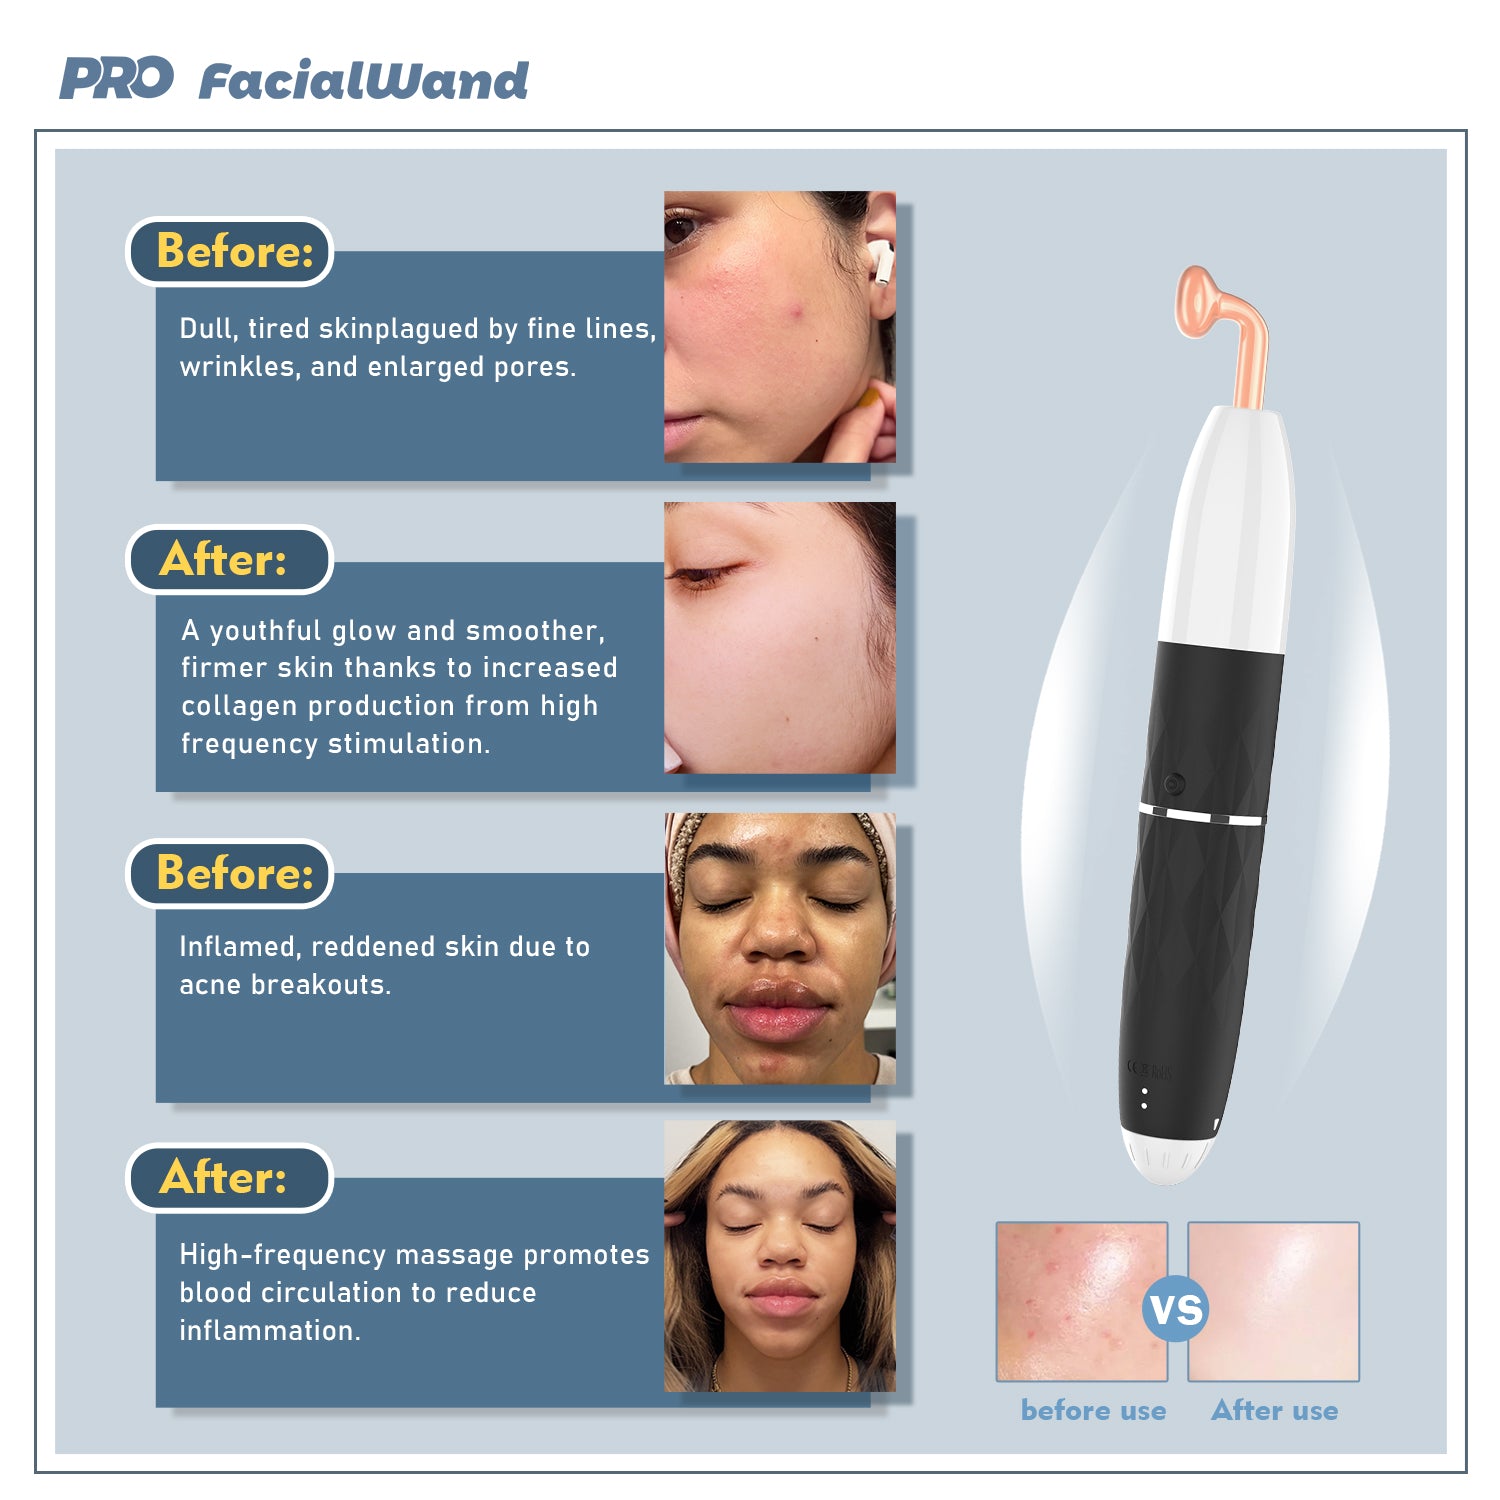 PRO facialwand high frequency facial wand before and after